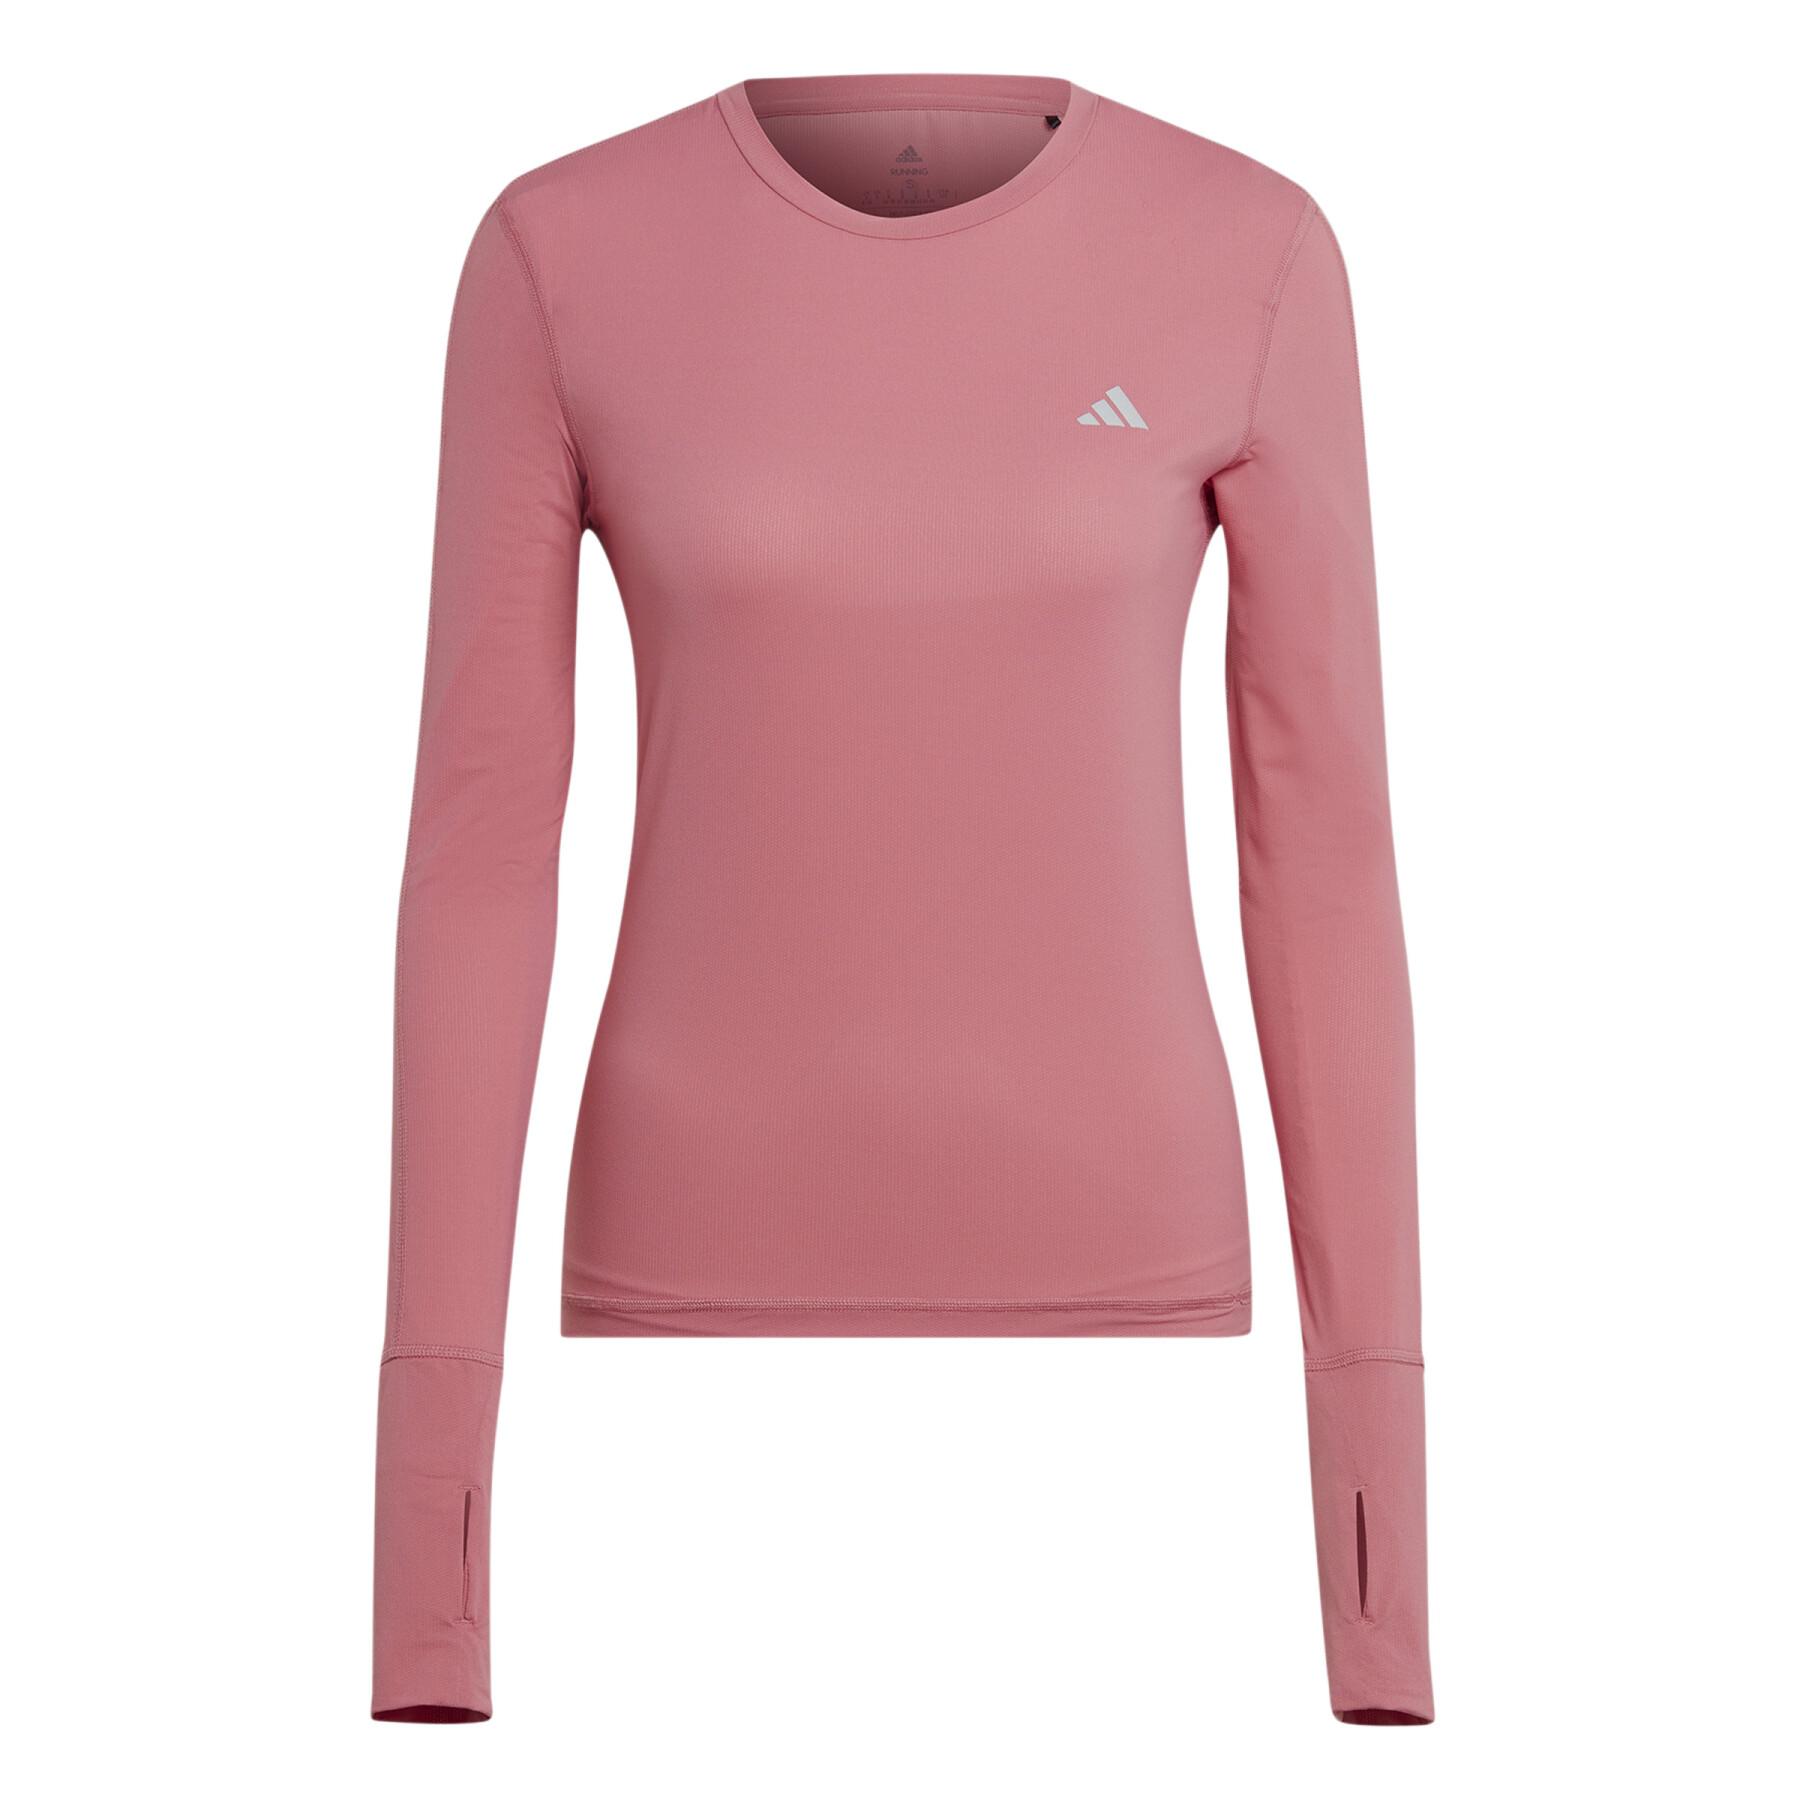 Maillot manches longues femme adidas Fast